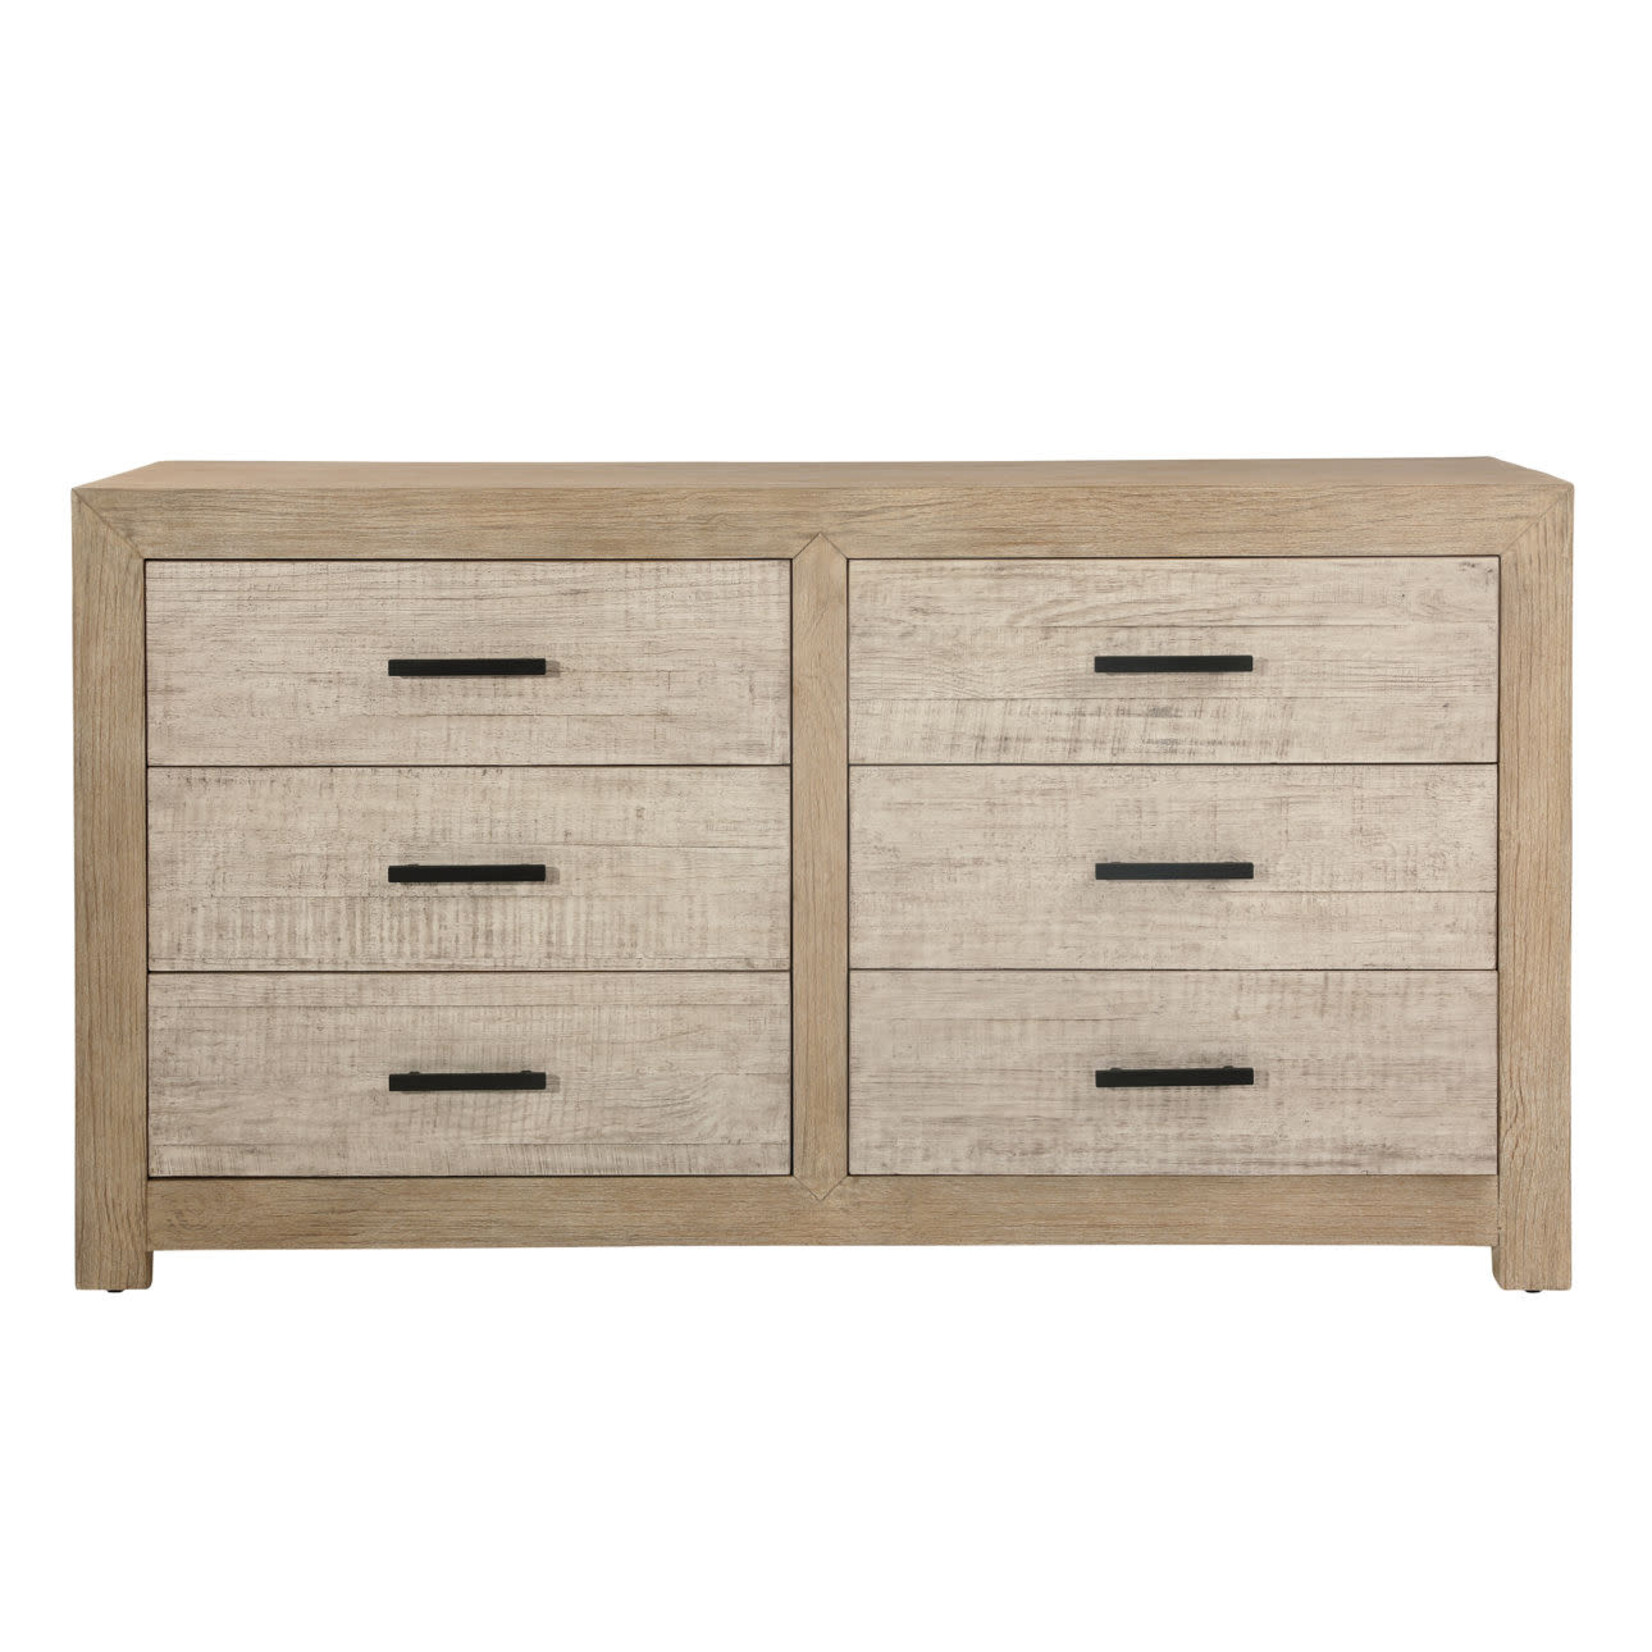 Outside The Box 66x19x36 Roux Light Warm Wash Reclaimed Pine Wood 6 Drawer Dresser